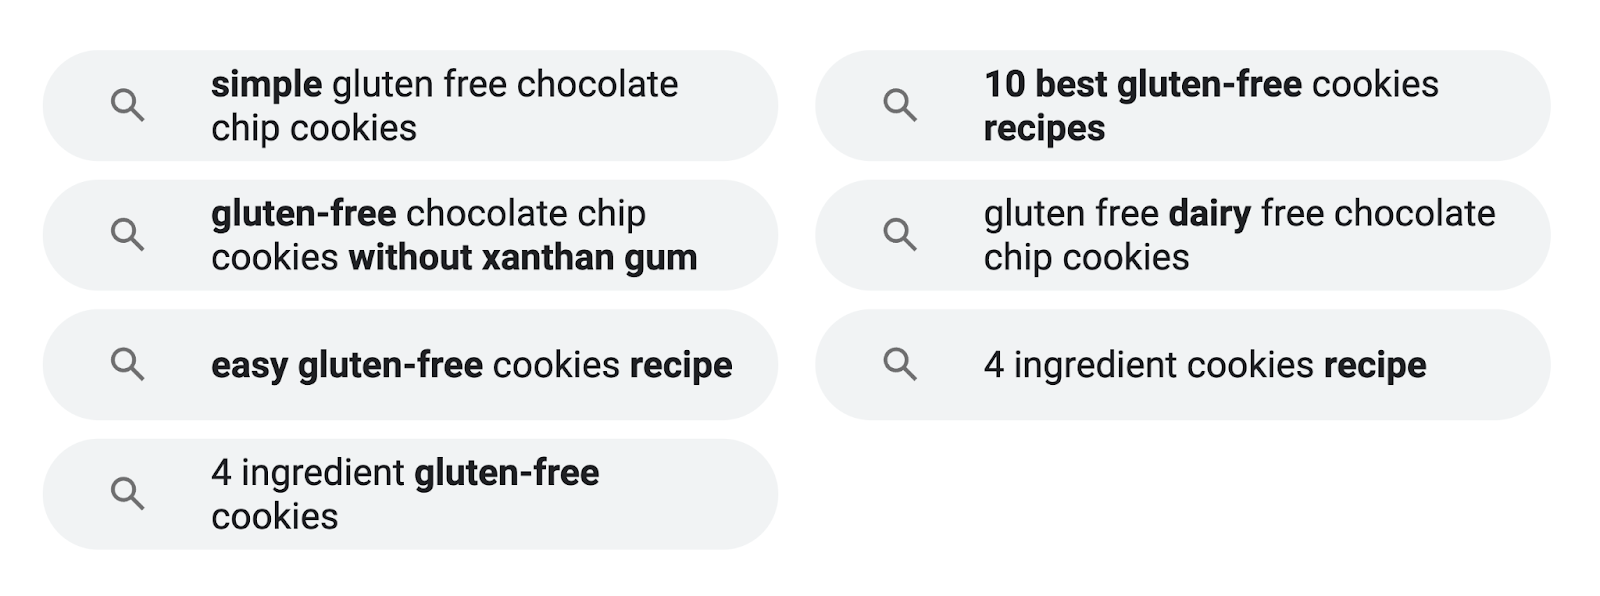 Google’s “Related searches” conception  for "4 constituent   gluten-free cocoa  spot   cookies"